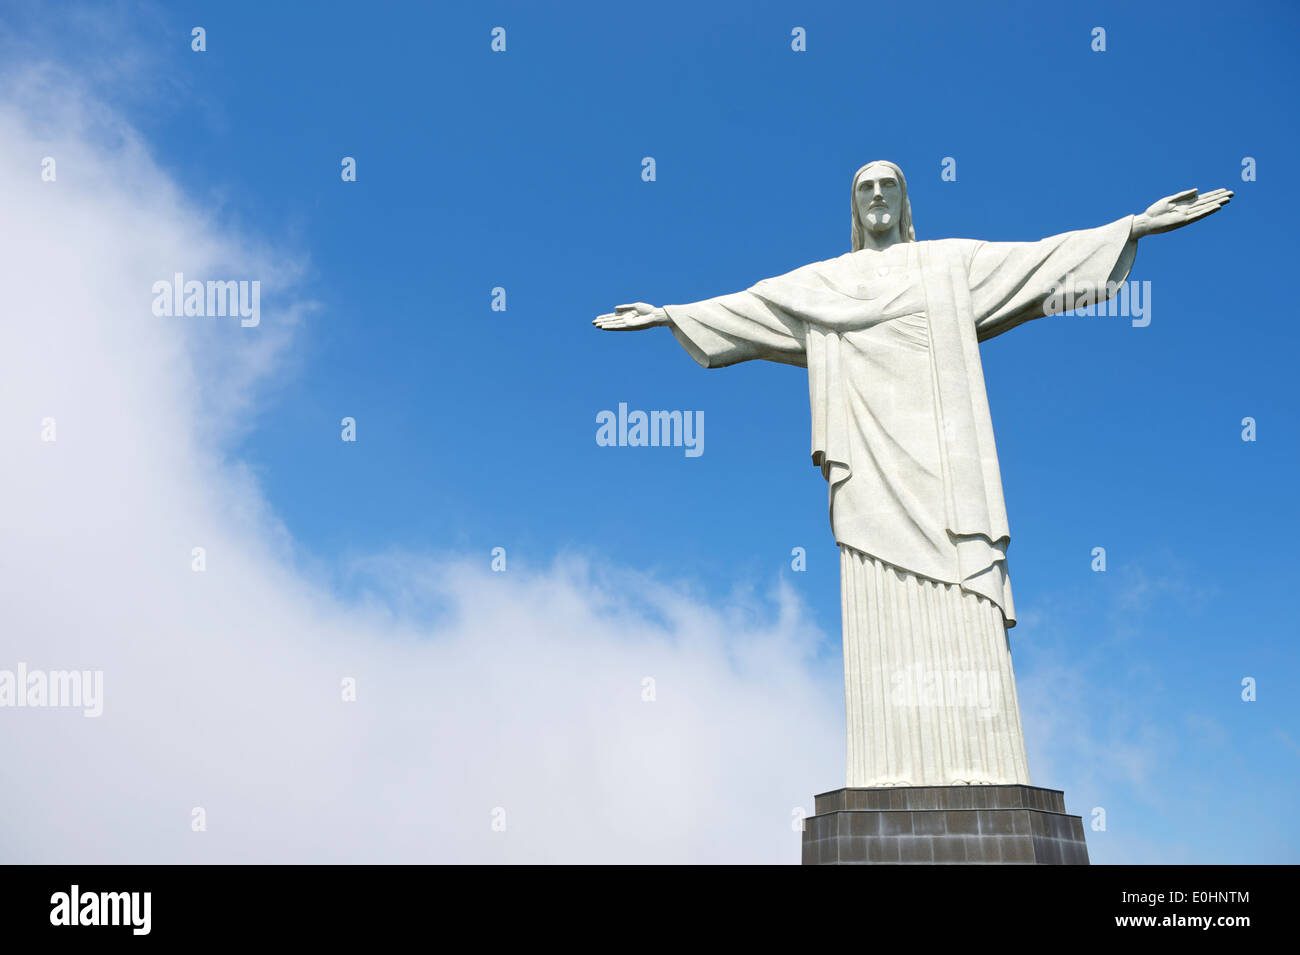 Corcovado weather Christ the Redeemer stands next to swirling mist clouds in Rio de Janeiro Brazil Stock Photo